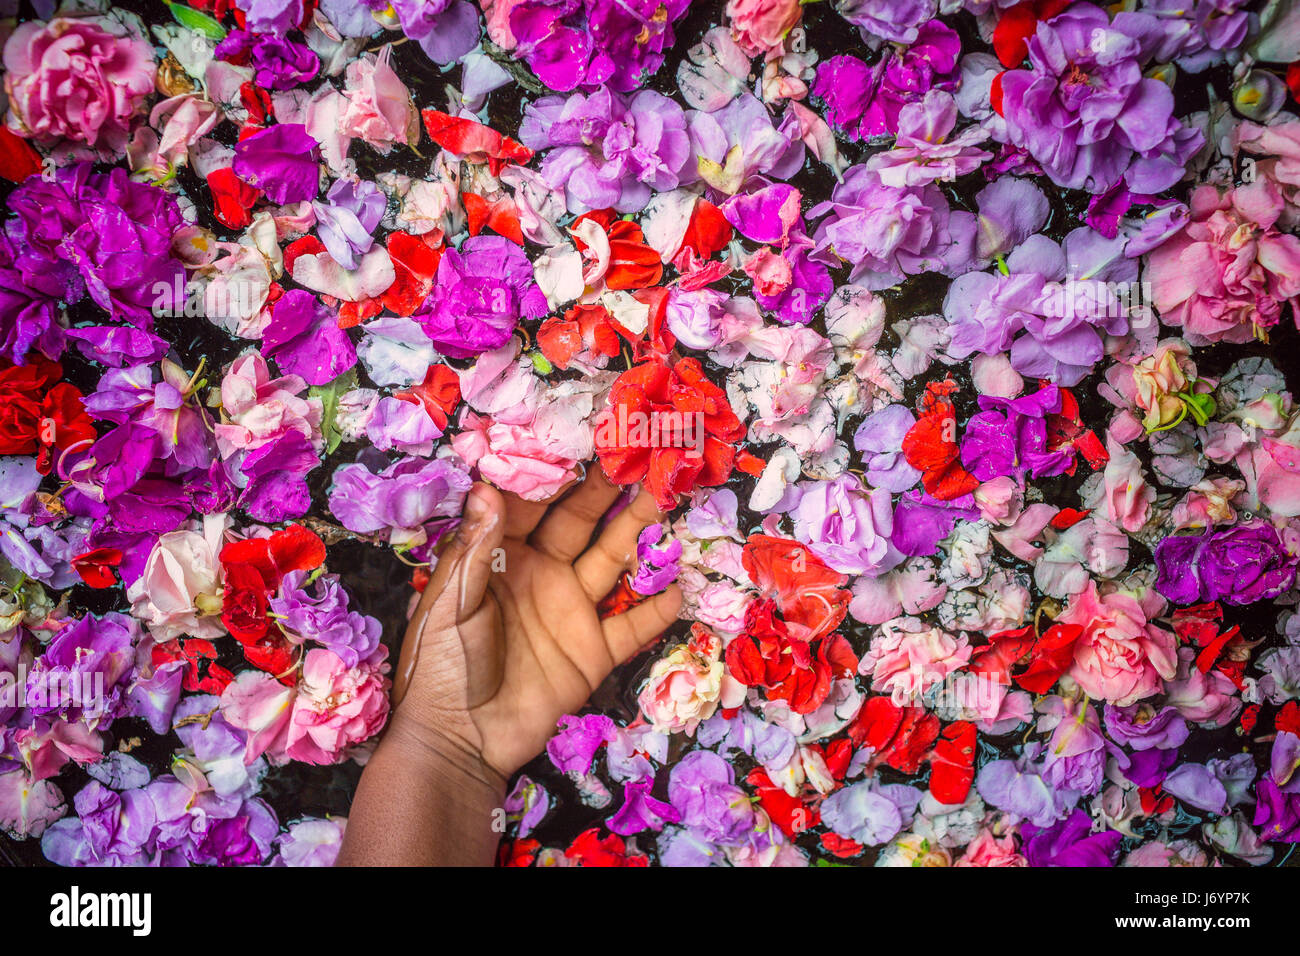 Girl's hand touching flowers floating in water Stock Photo